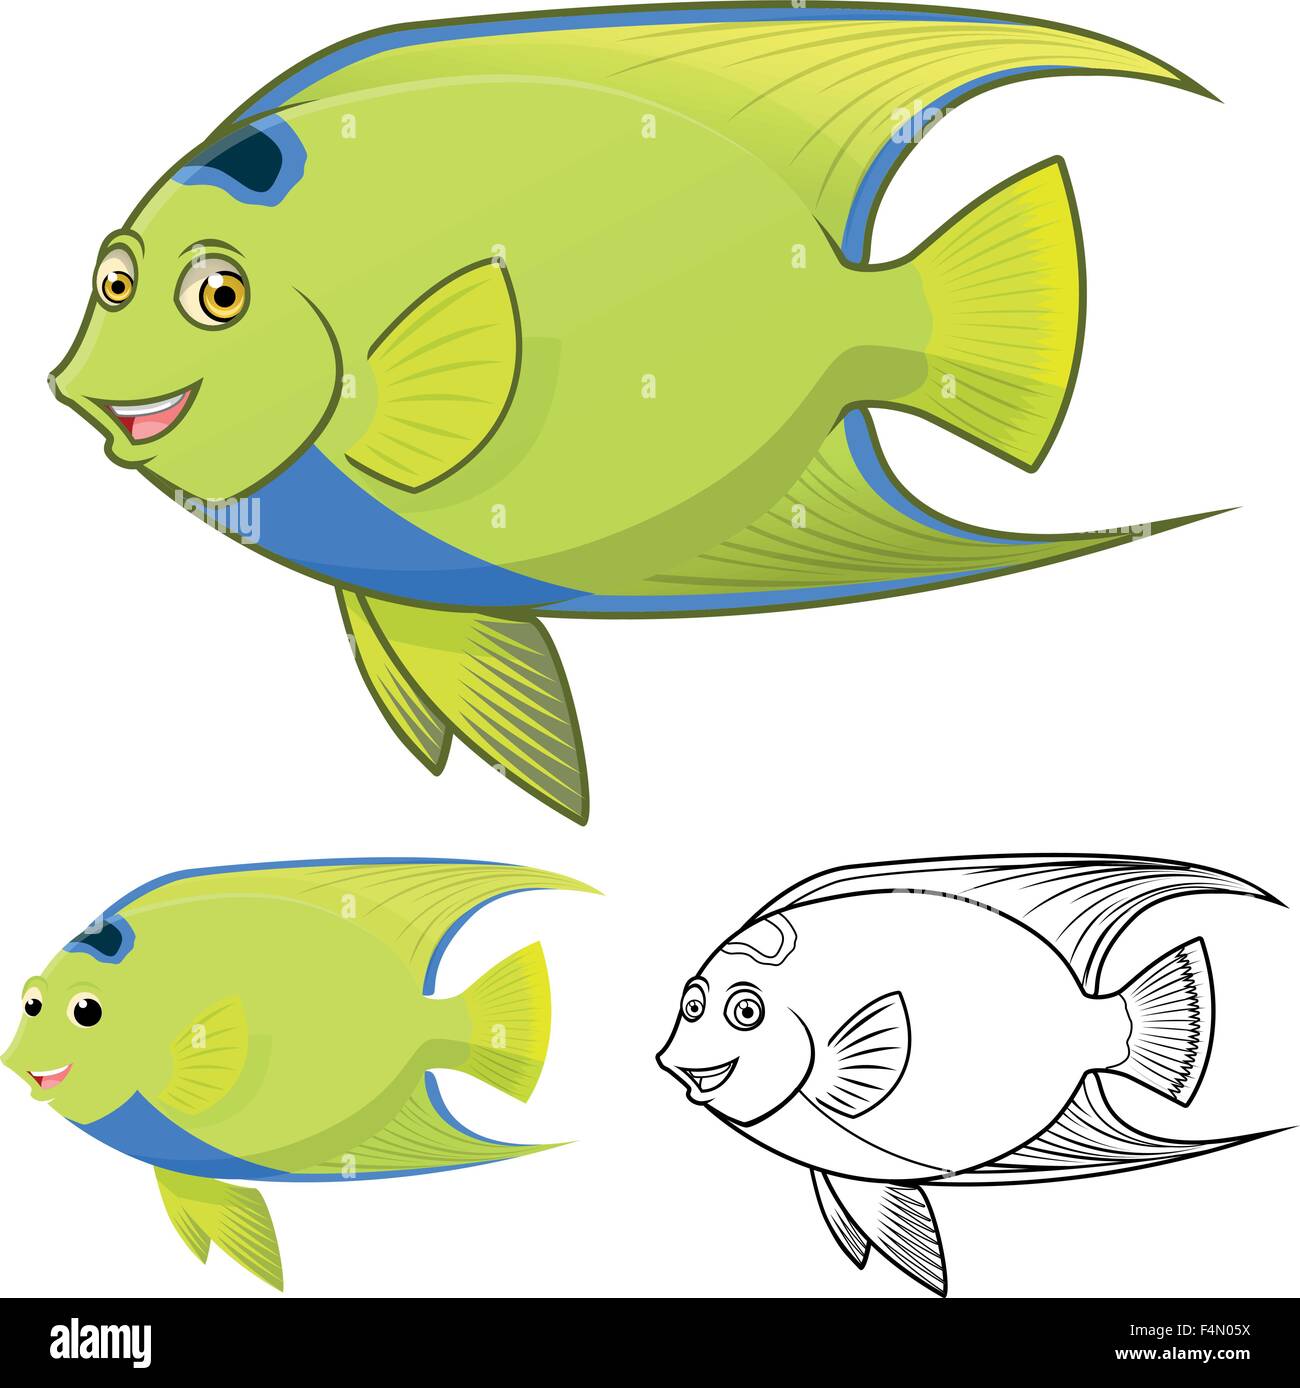 High Quality Queen Angel Fish Cartoon Character Include Flat Design and Line Art Version Stock Vector